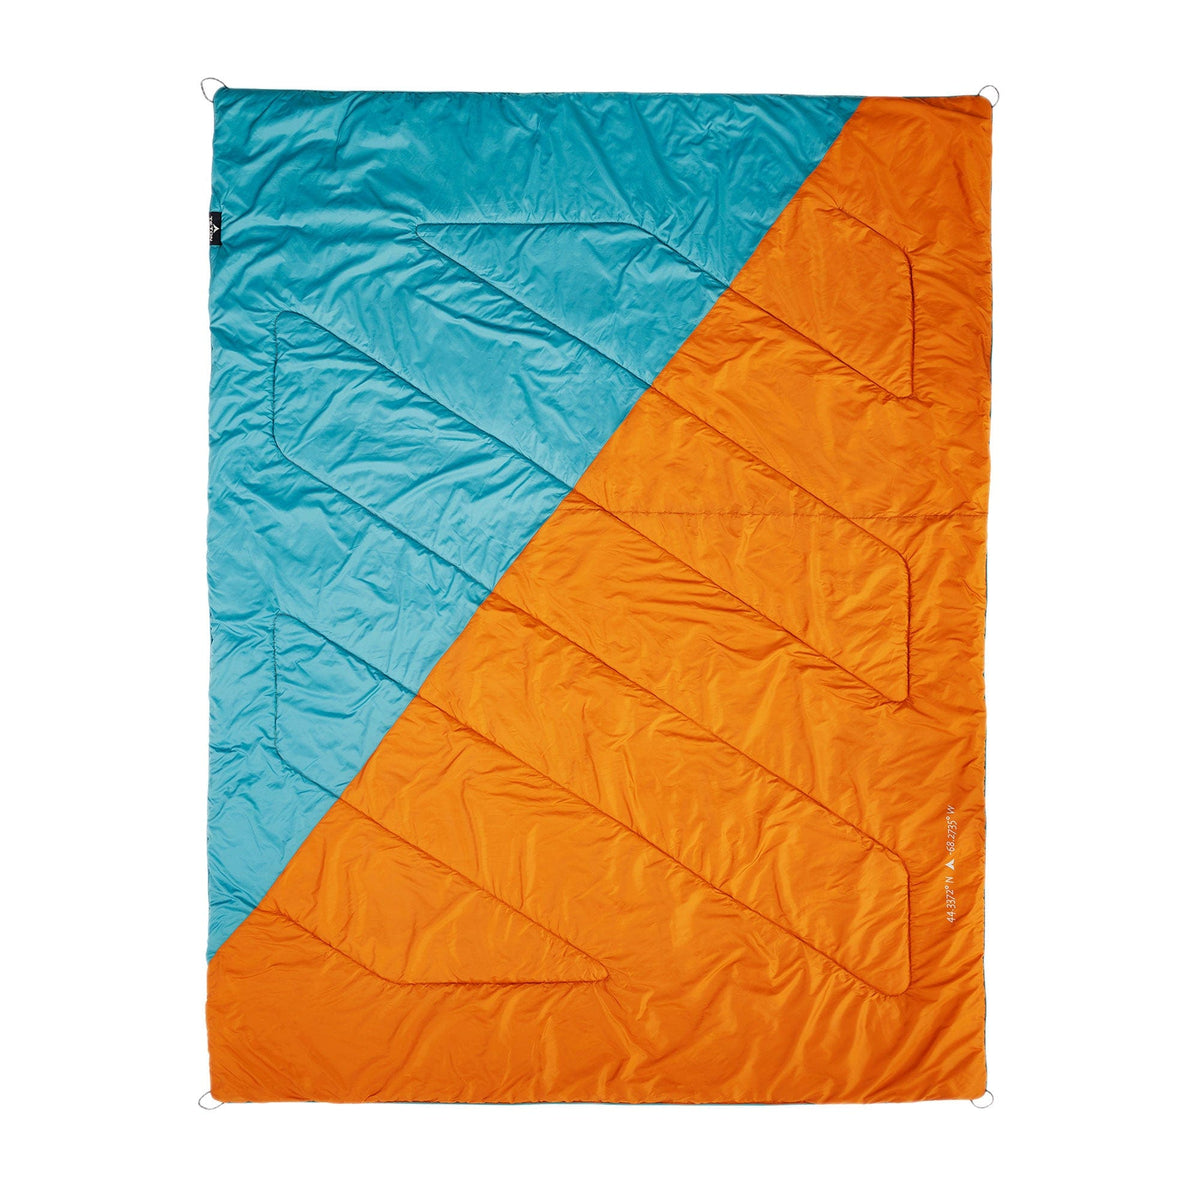 TETON Sports Acadia Outdoor Blanket - OR Show '24 Teal & Copper 70003-OR